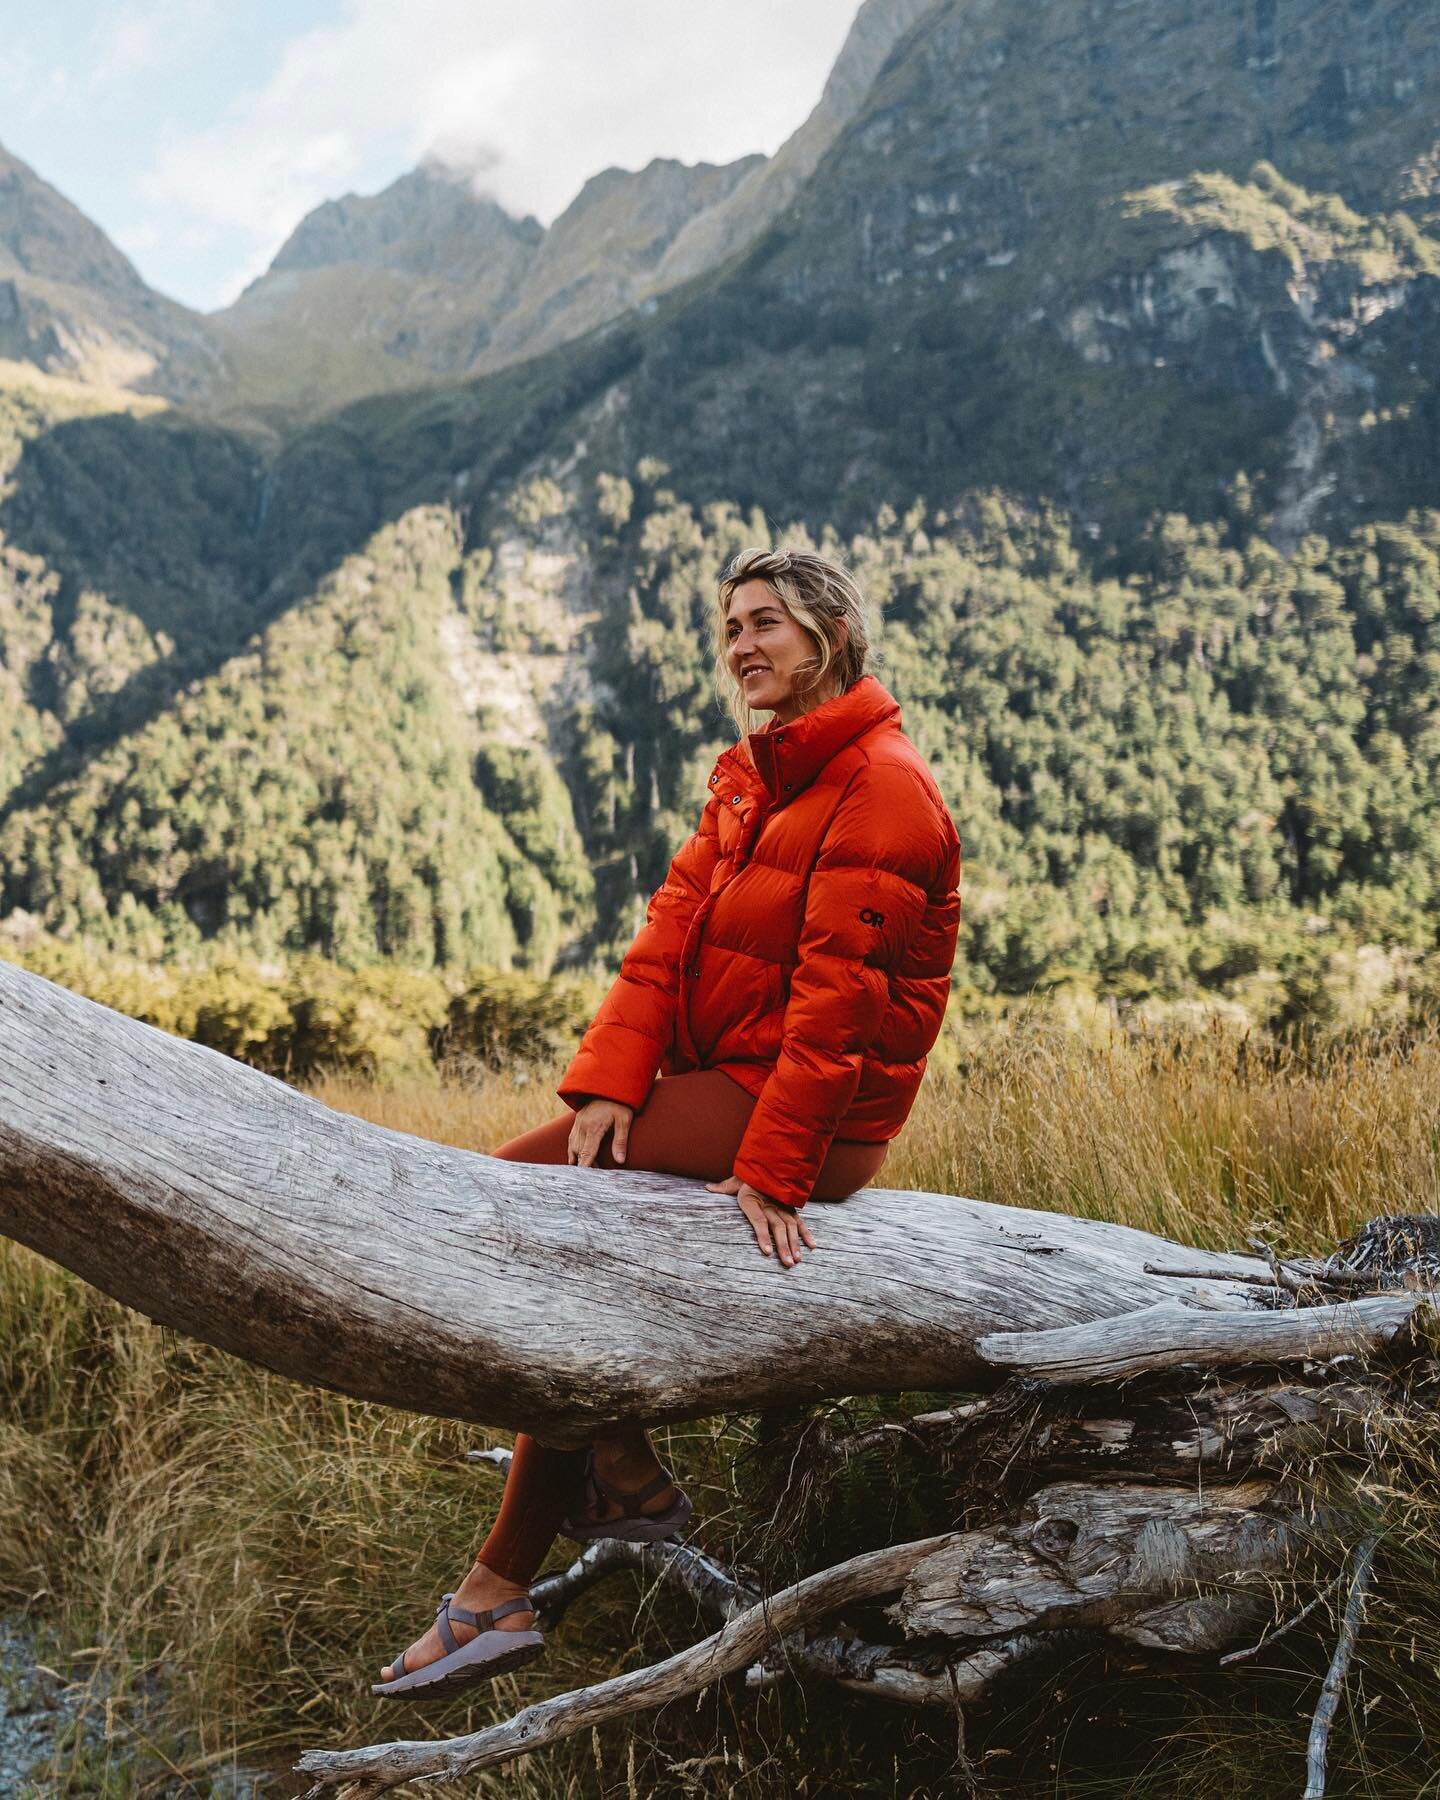 One last salute to New Zealand. 
Travel doesn&rsquo;t always go as planned, but through all the ups and downs, this trip turned out to be just what the doctor ordered: community and solitude, fear and courage, energy and exhaustion, local produce and